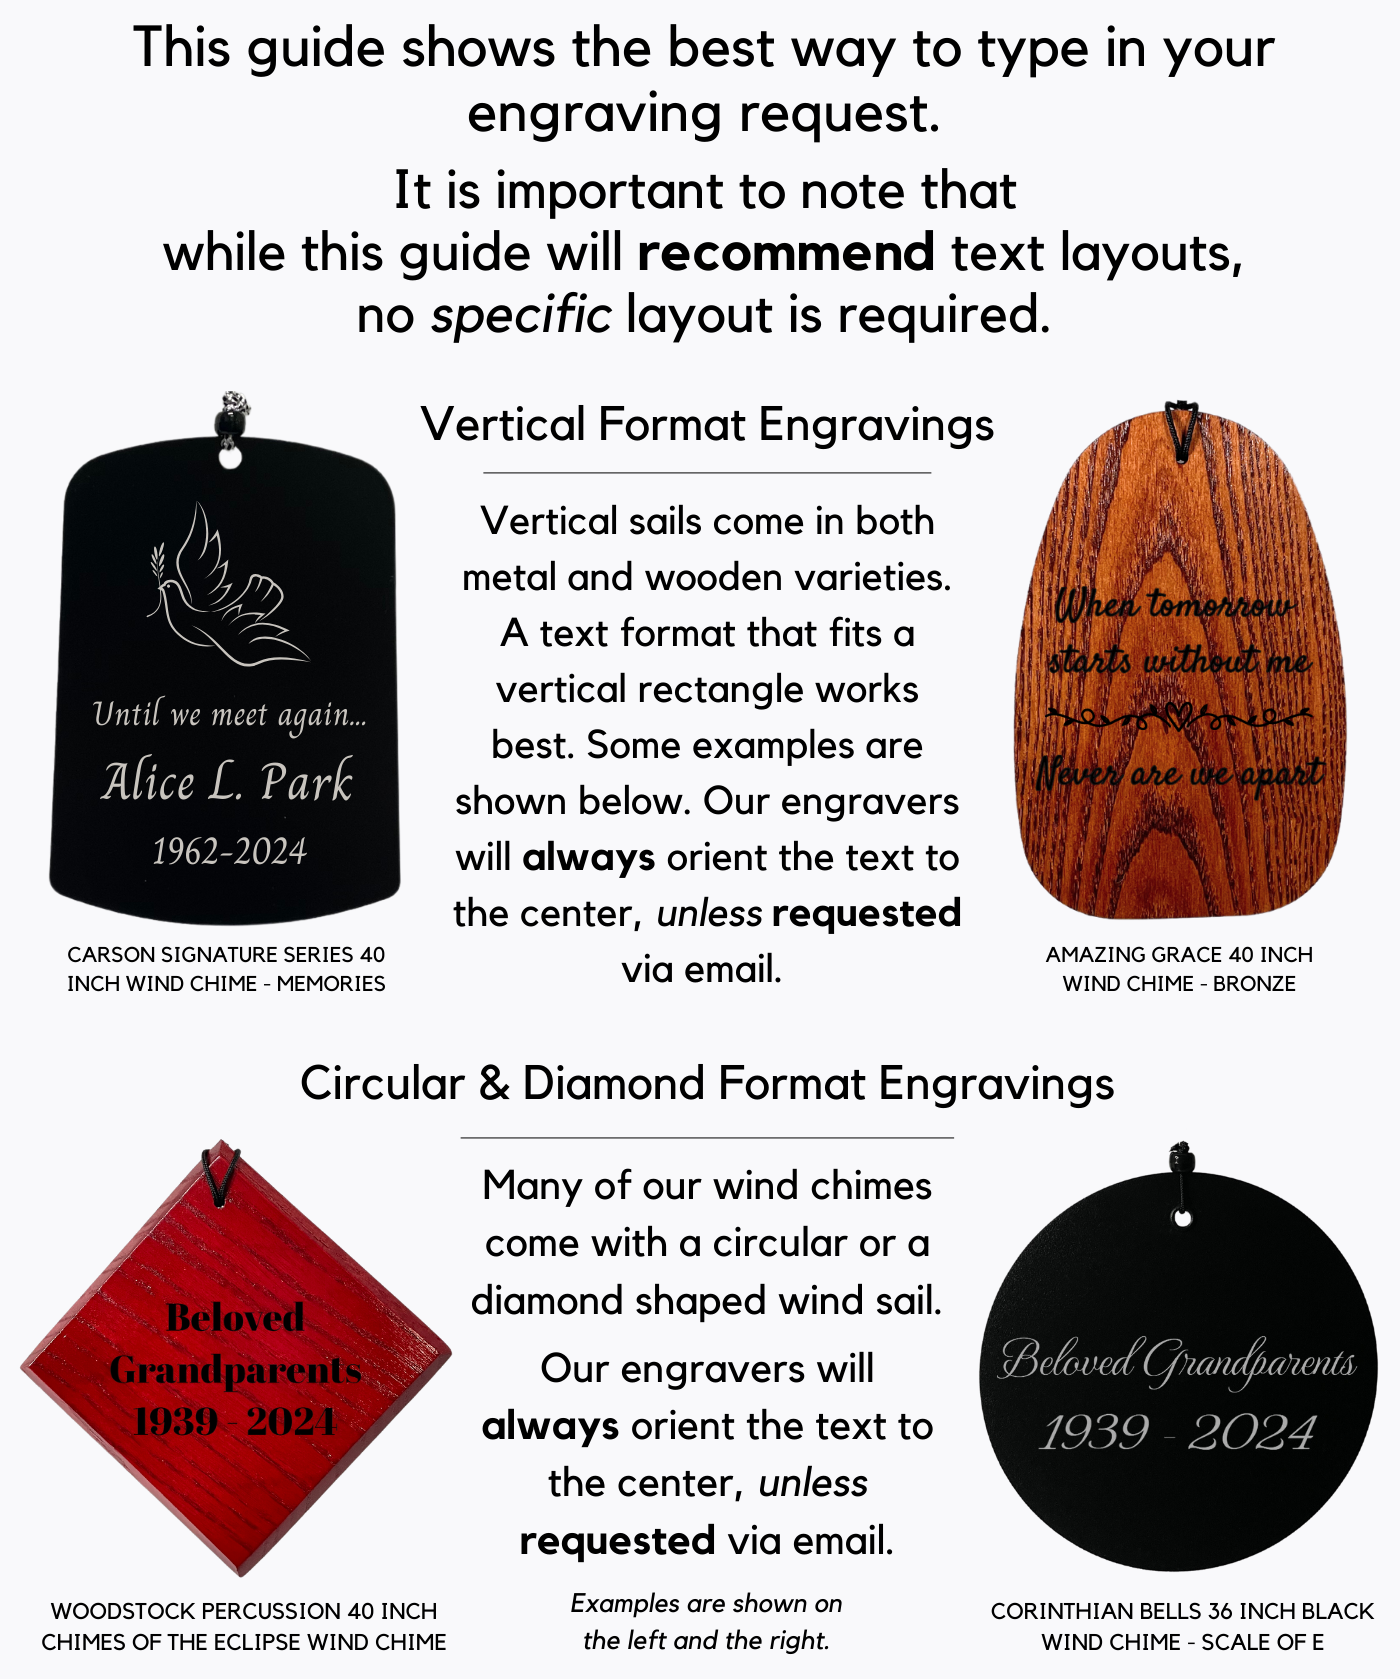 Sail Shapes & Text Formats: This guide shows the best way to type in your engraving request. It is important to note that while this guide will recommend text layouts, no specific layout is required. Vertical Format Engravings Vertical sails come in both metal and wooden varieties. A text format that fits a vertical rectangle works best. Some examples are shown below. Our engravers will always orient the text to the center, unless requested via email. Circular & Diamond Format Engravings Many of our wind chimes come with a circular or a diamond shaped wind sail.  Examples are shown below. Our engravers will always orient the text to the center, unless requested via email.